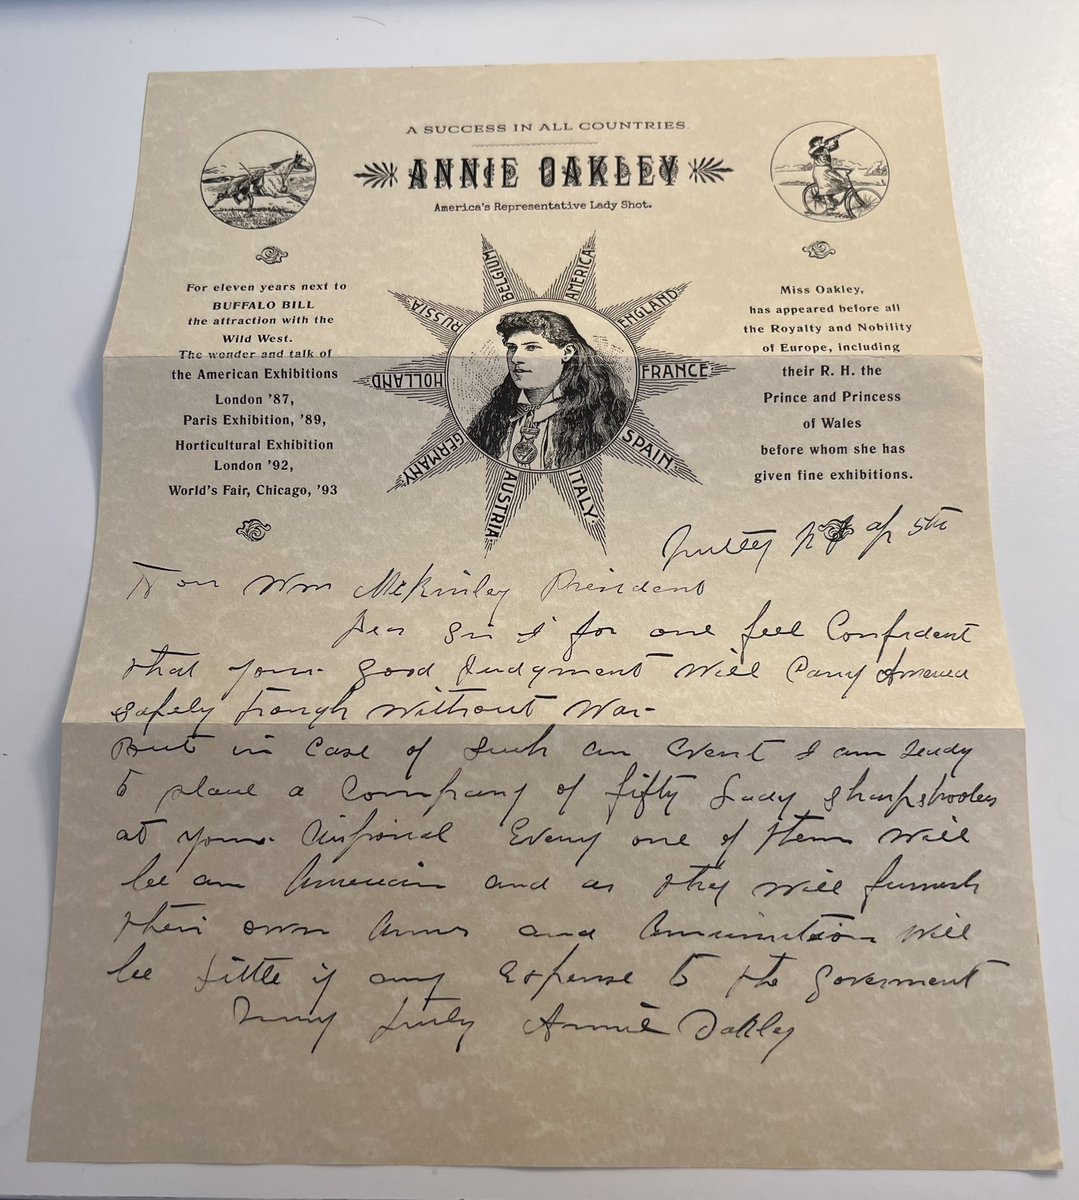 For my birthday I received a gift called History By Mail. Every month I will receive a replica historical document. 

This month is a letter from Annie Oakley to President McKinley offering 50 female sharpshooters during the Spanish-American War.  #NerdAlert